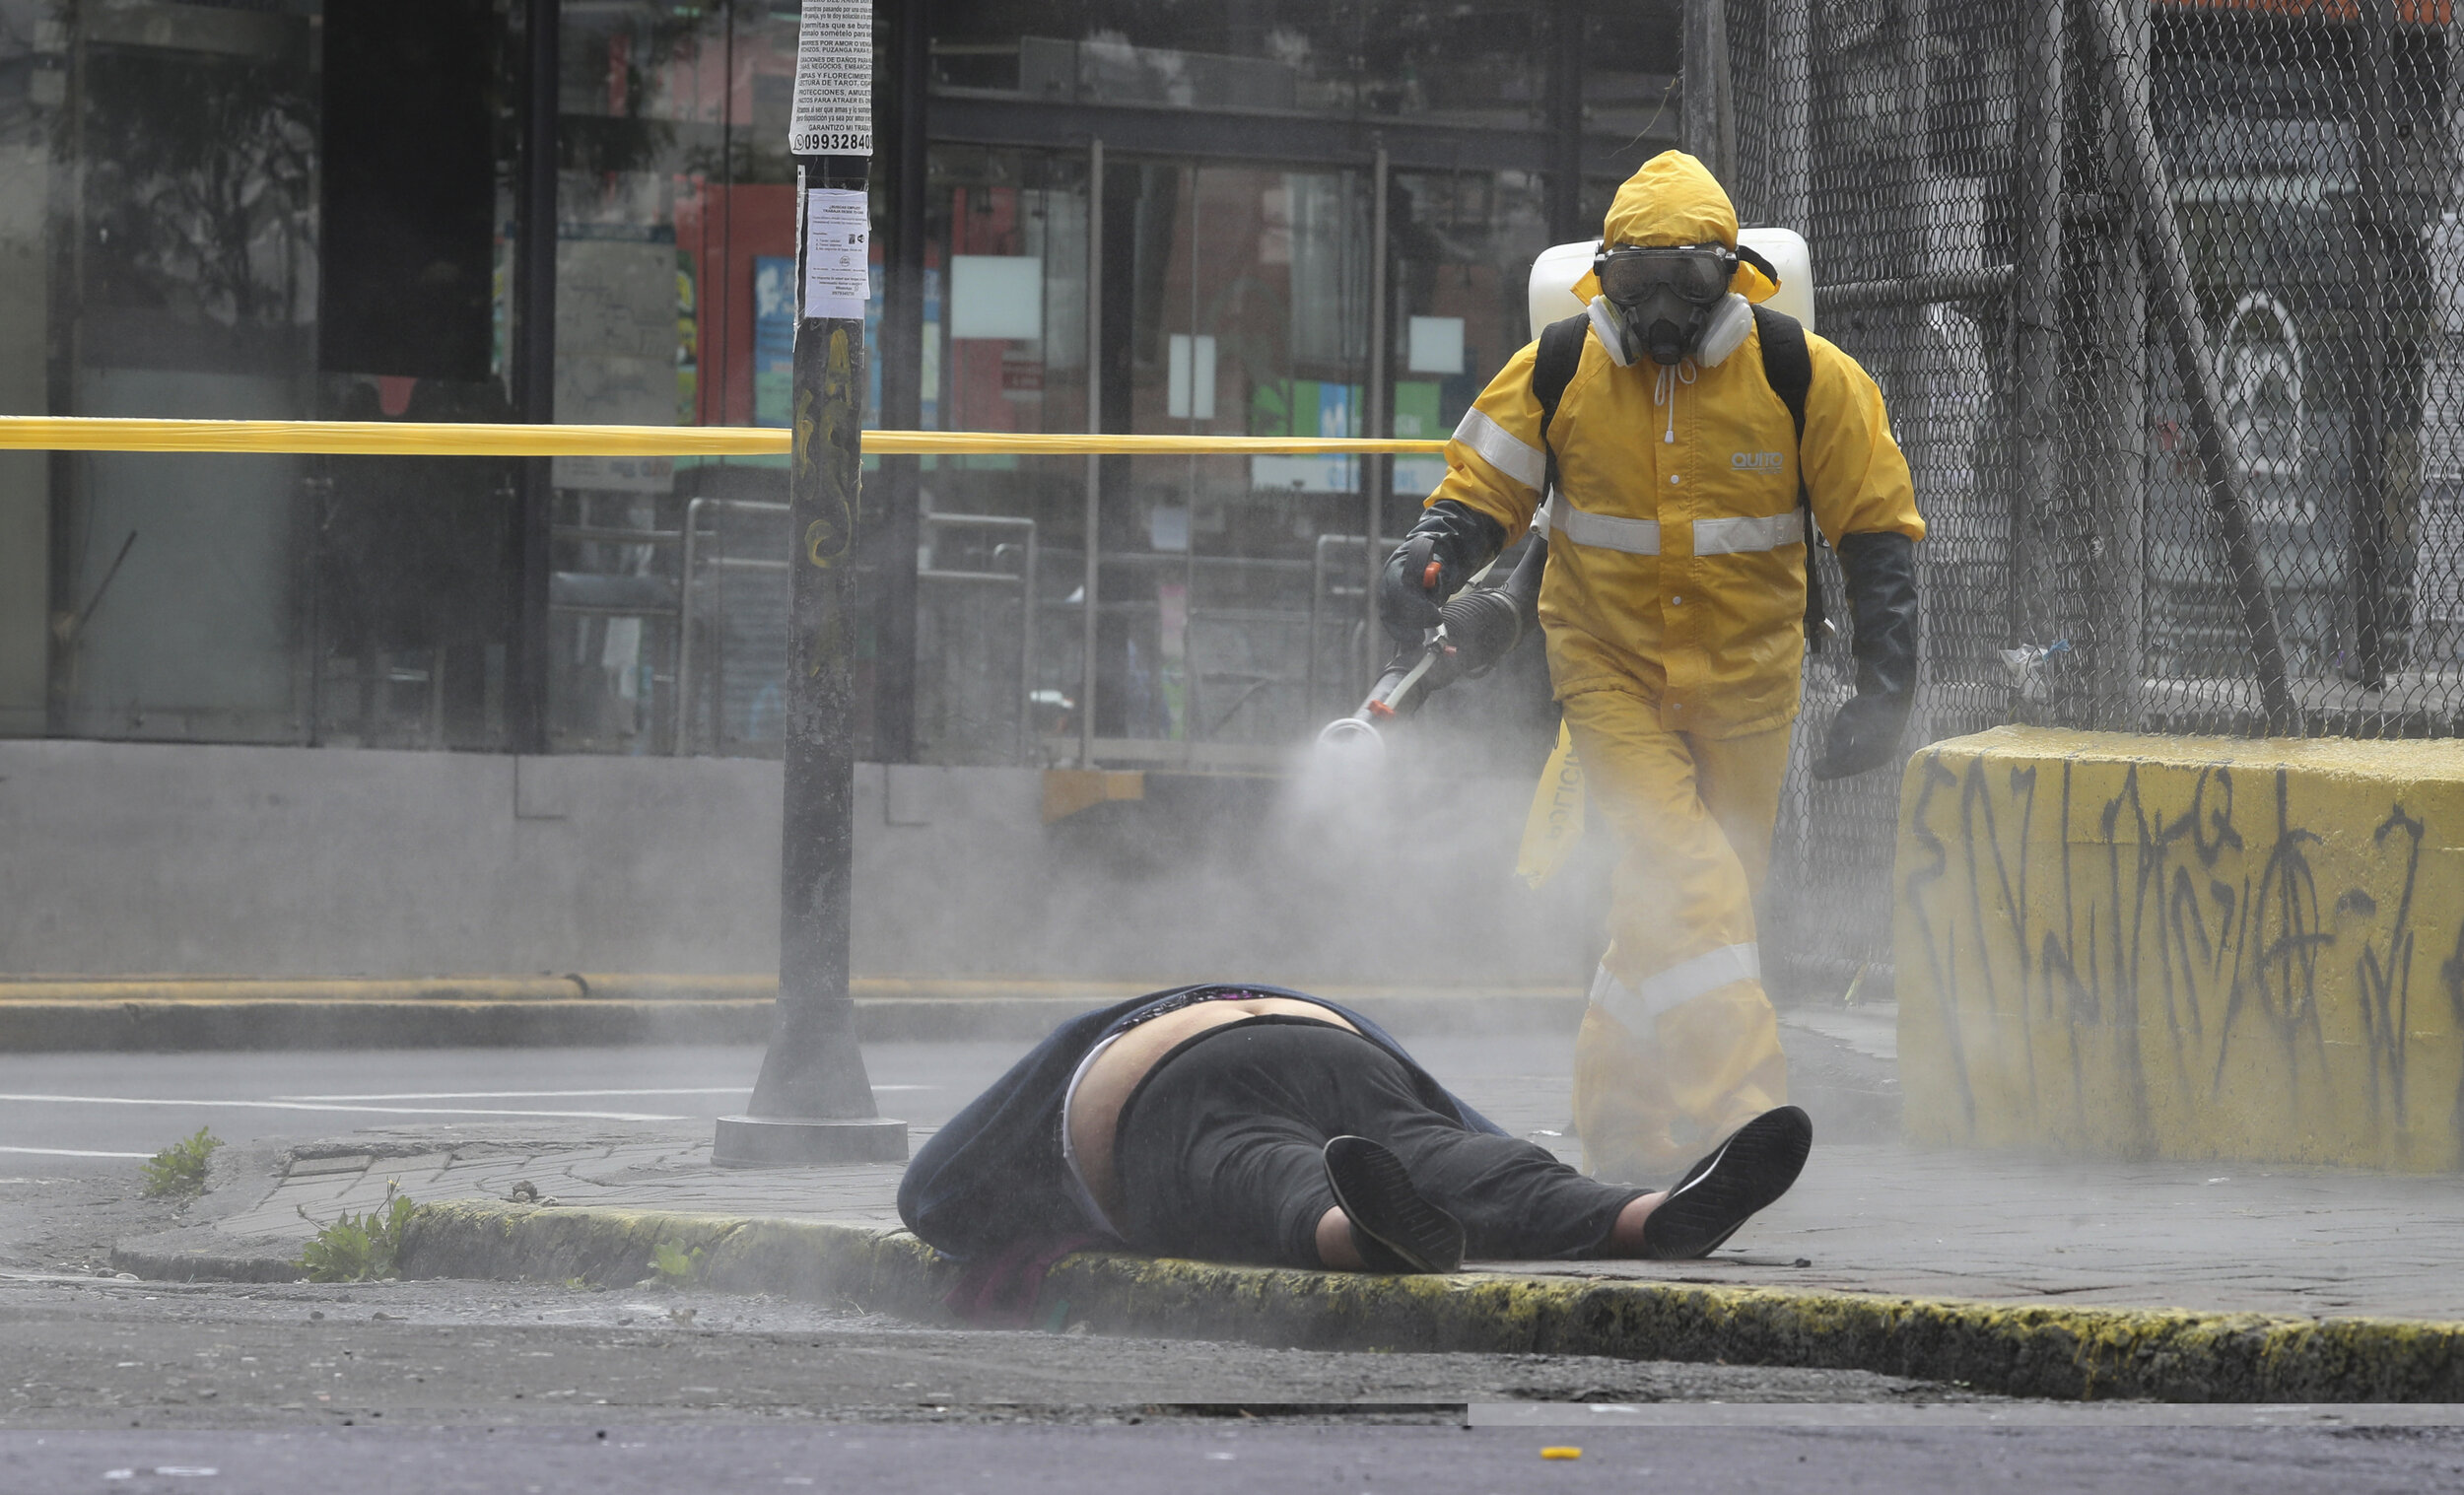  A city forensic worker sprays disinfectant on the body of a woman who died in the street in Quito, Ecuador, Thursday, May 14, 2020. Forensics conducted a COVID-19 rapid test and said the woman tested negative. (AP Photo/Dolores Ochoa) 